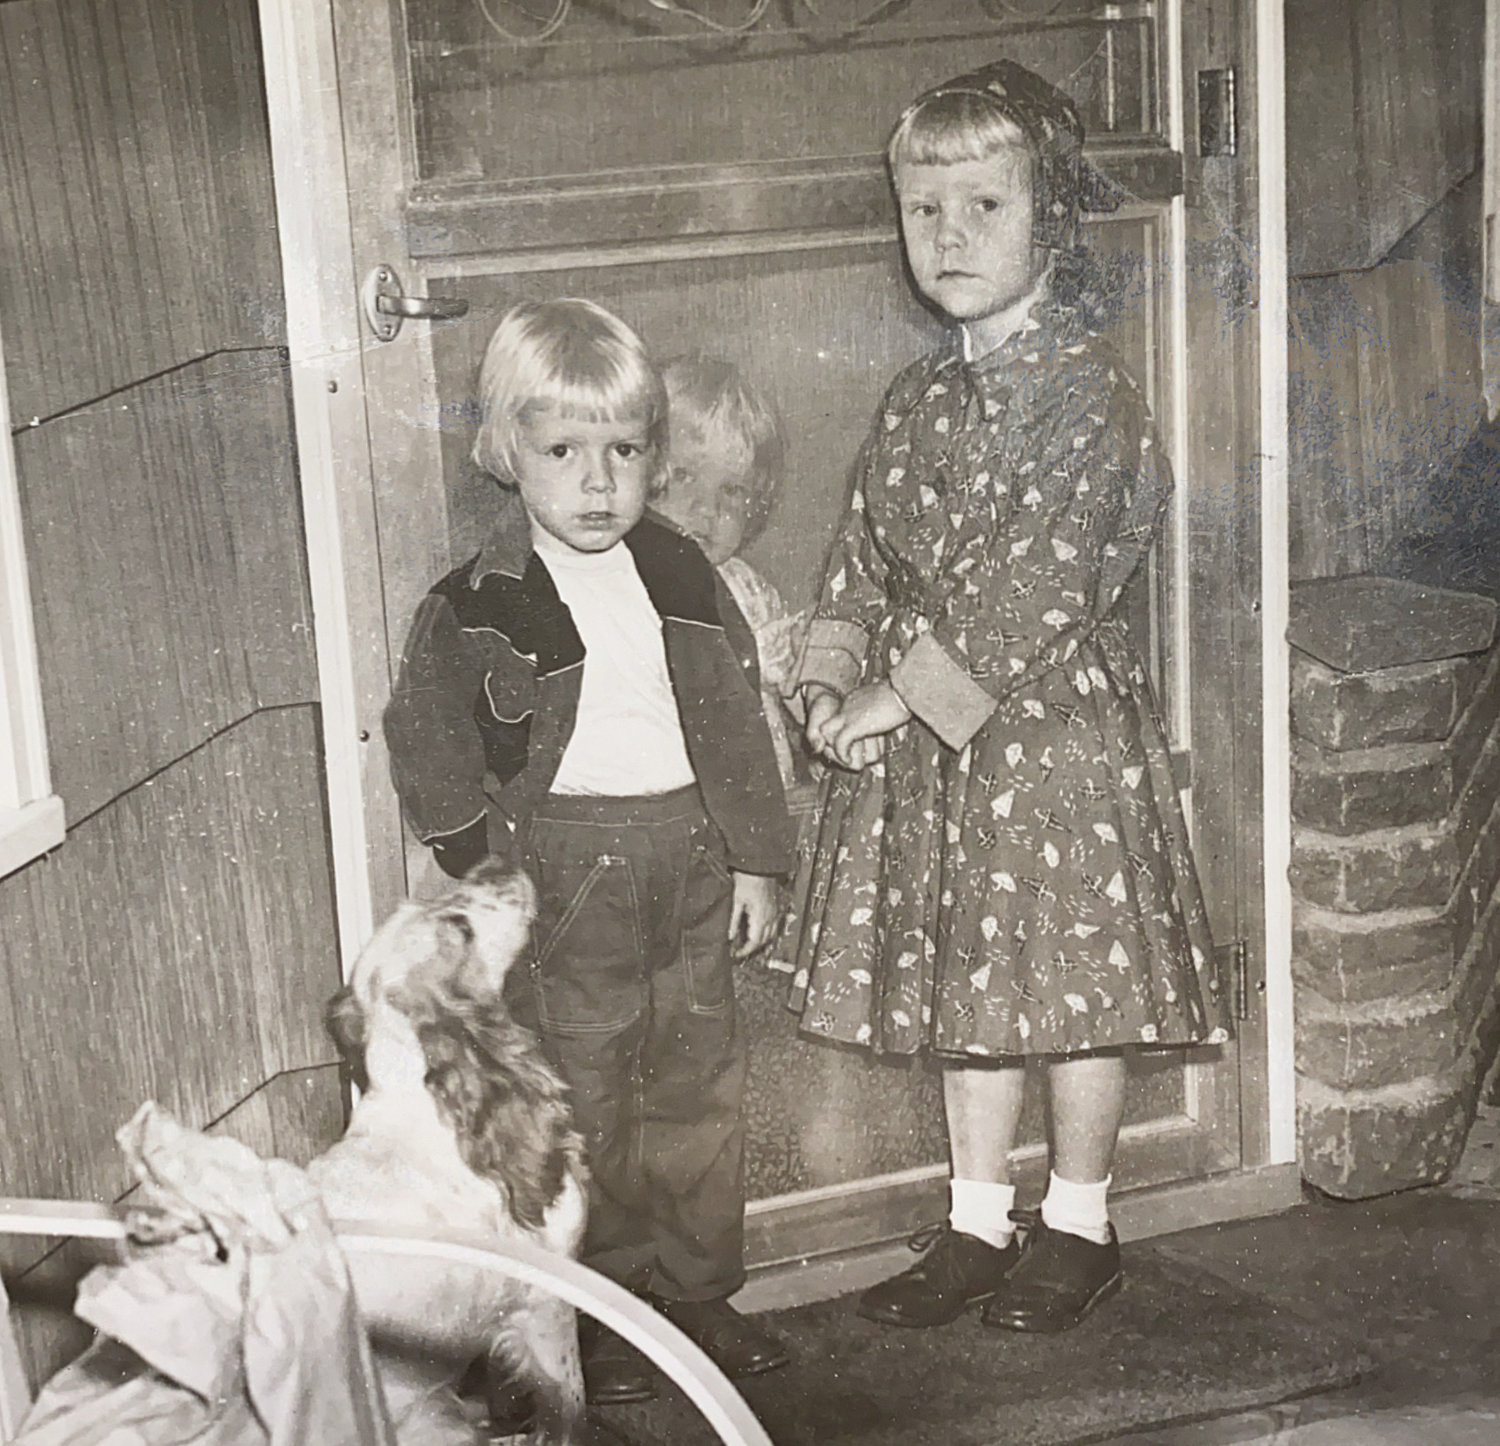 September 3, 1957- Kathy (right) on the first day of kindergarten. Sister Billie (center) is behind the screen door. Sister Laurie (left) is none too happy at not being able to go to school yet. Our faithful dog Sugar stands at the ready.